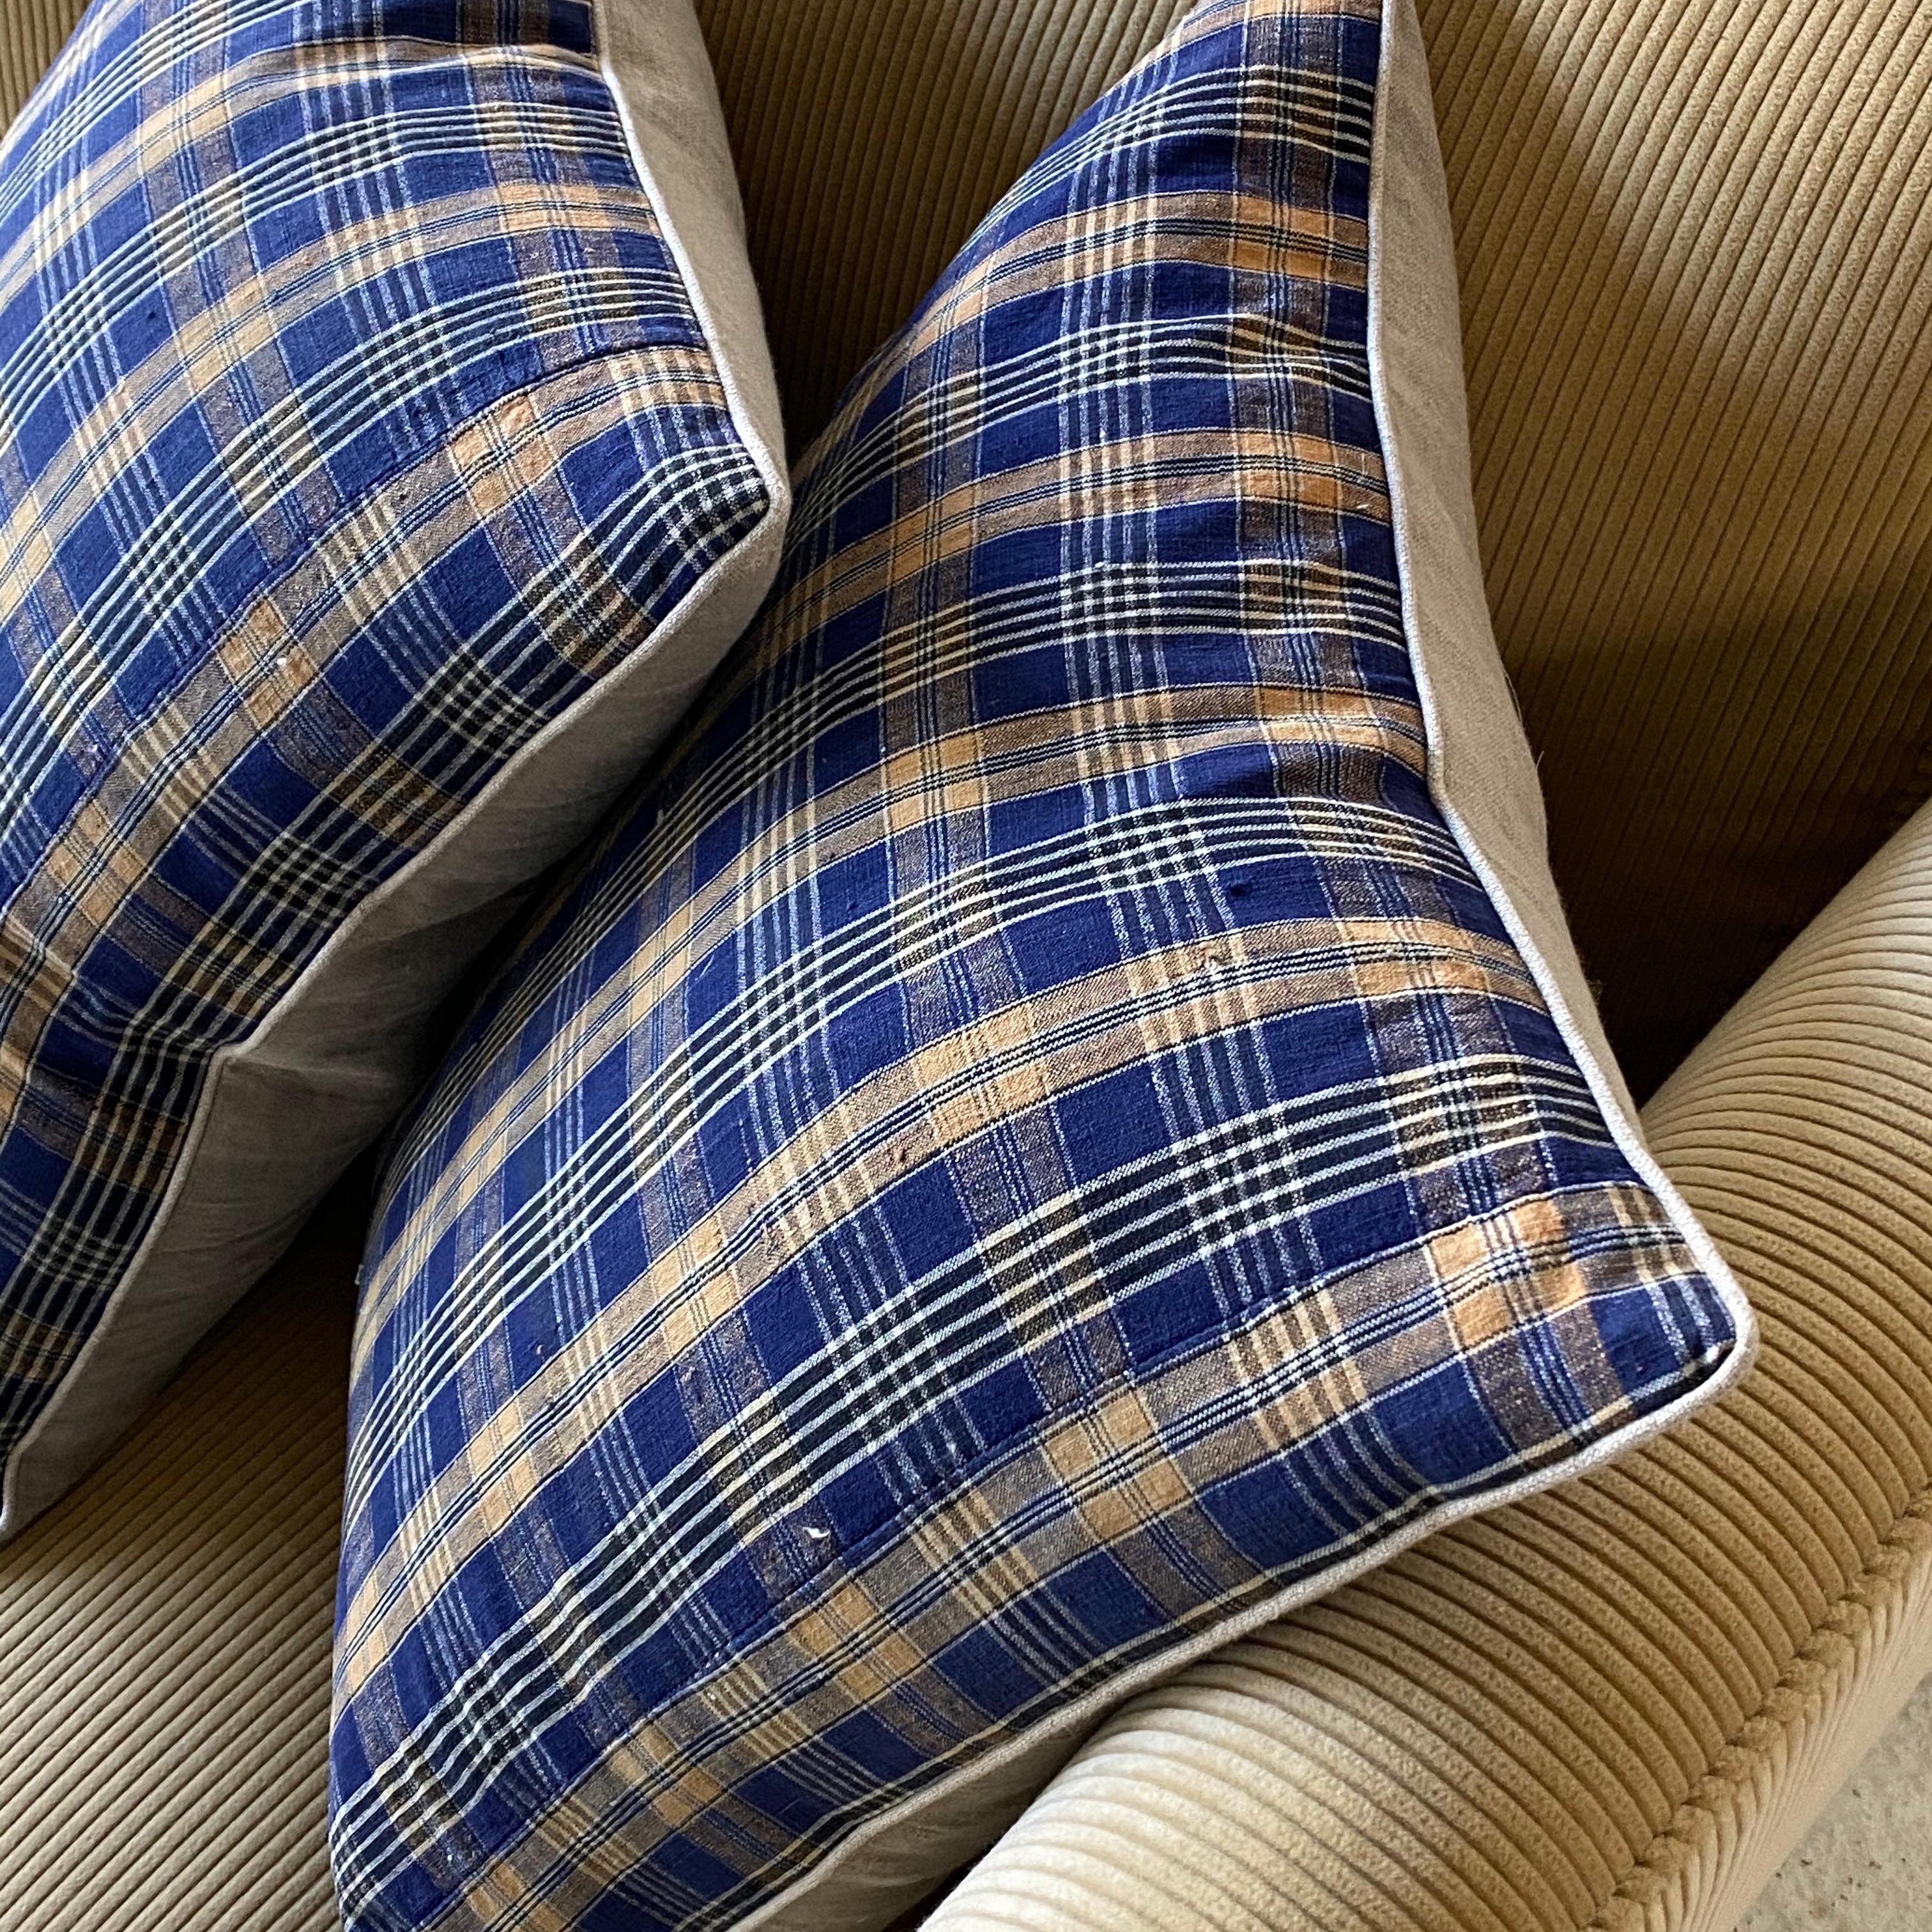 Blue and orange plaid madras pillow made from Antique textiles, feather and down insert included.